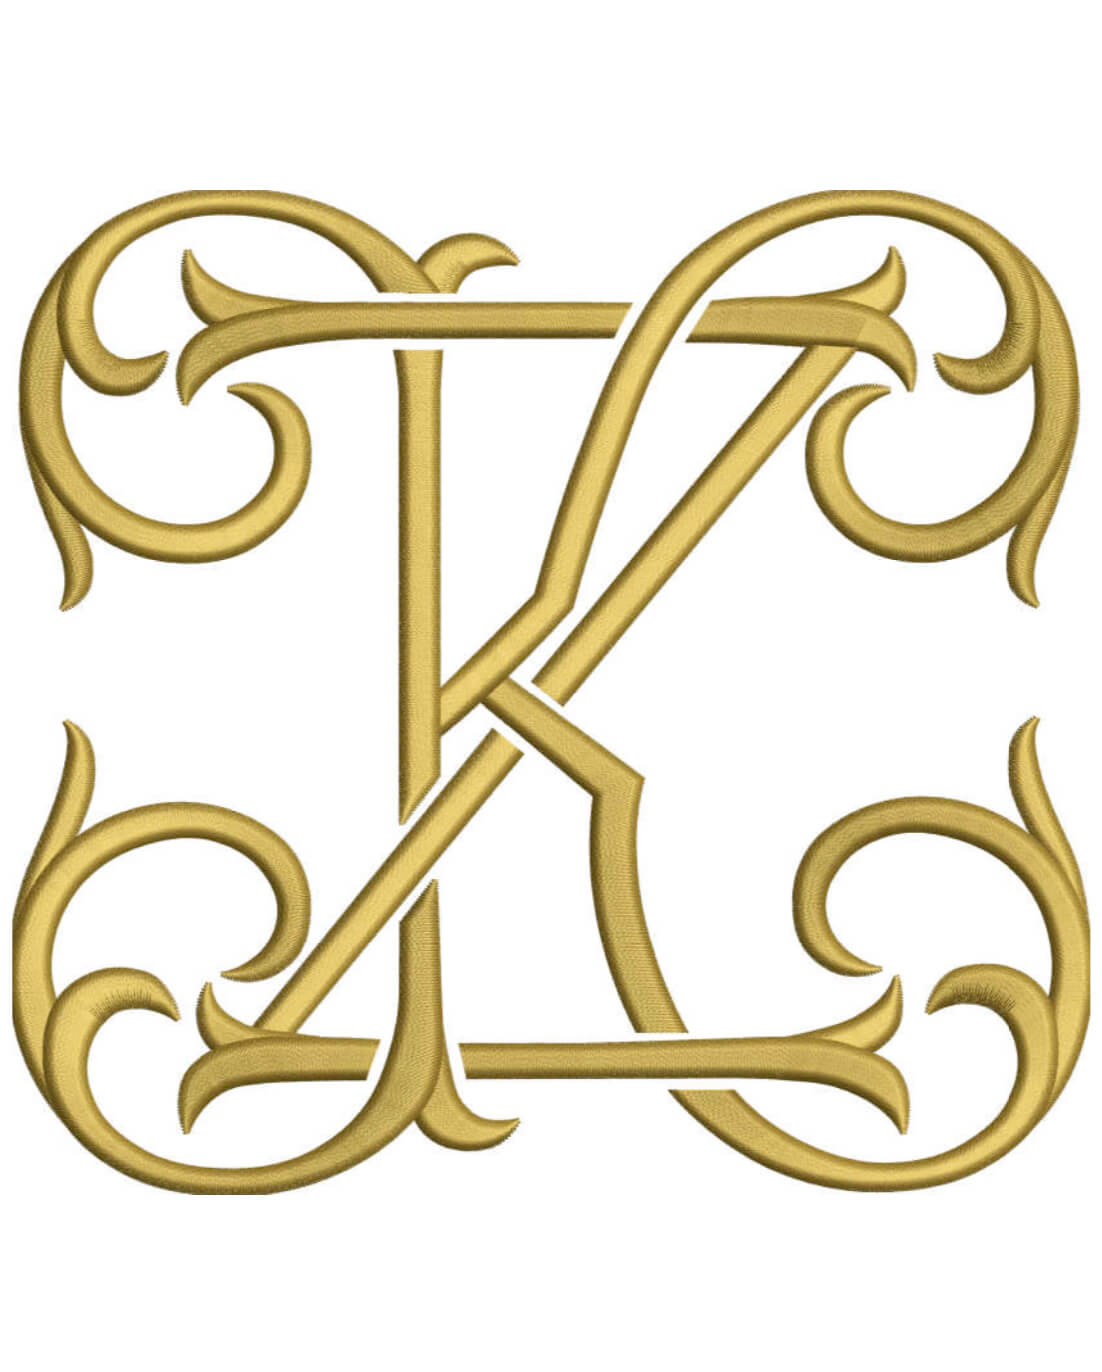 Monogram Couture KZ for Embroidery